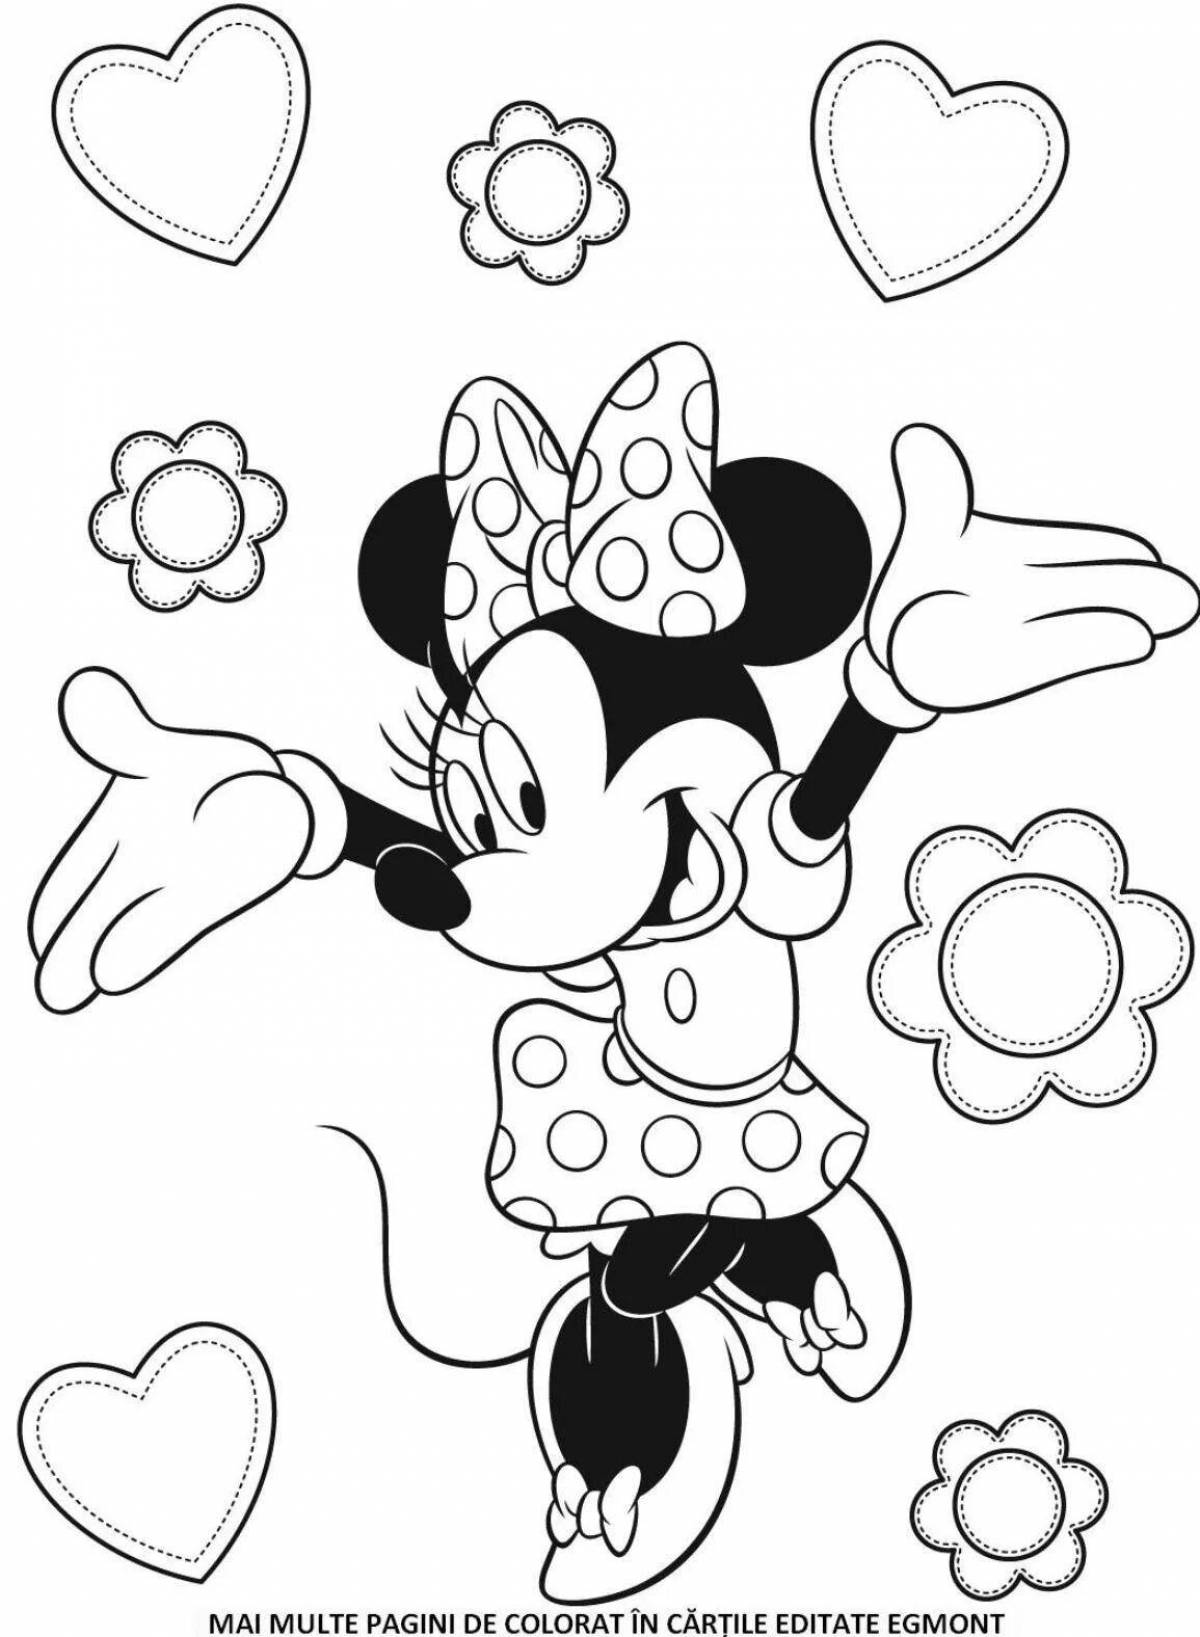 Coloring nice minnie mouse